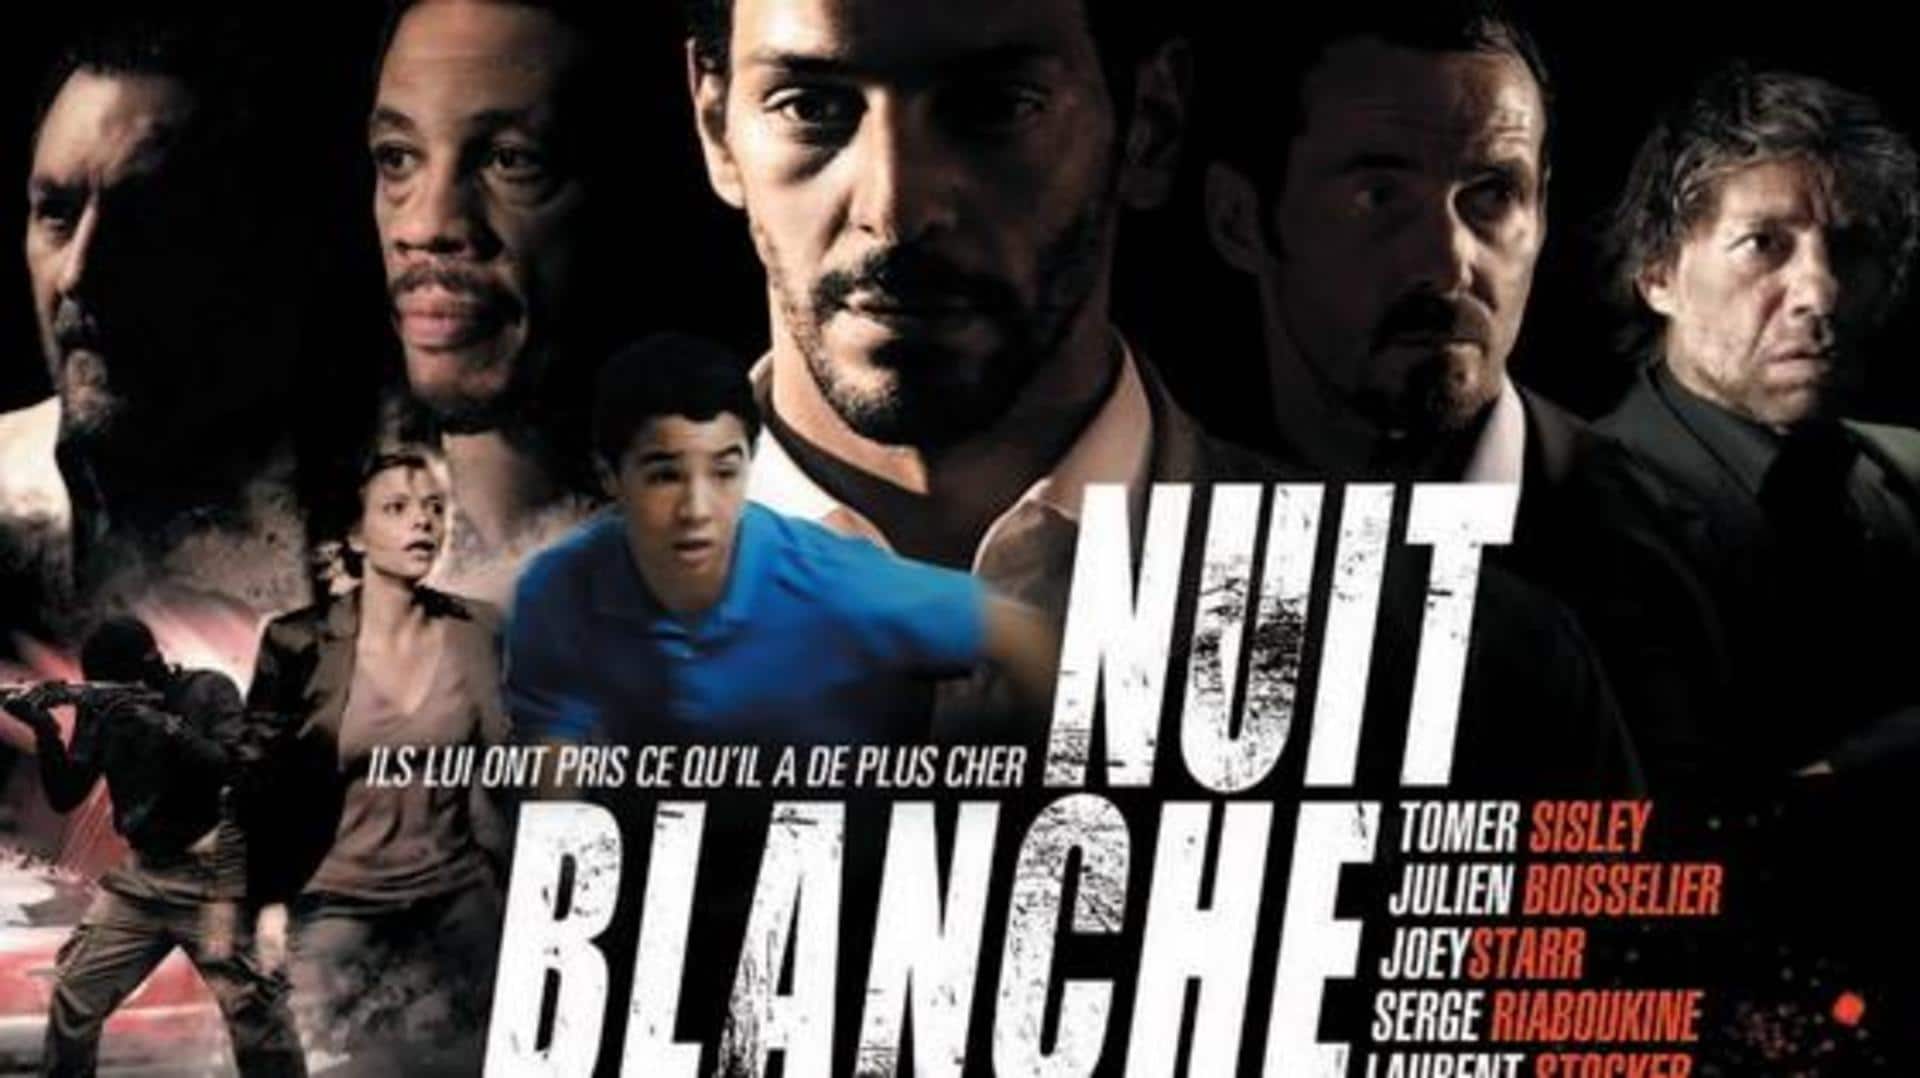 'Bloody Daddy' release date set: Everything about 'Nuit Blanche'